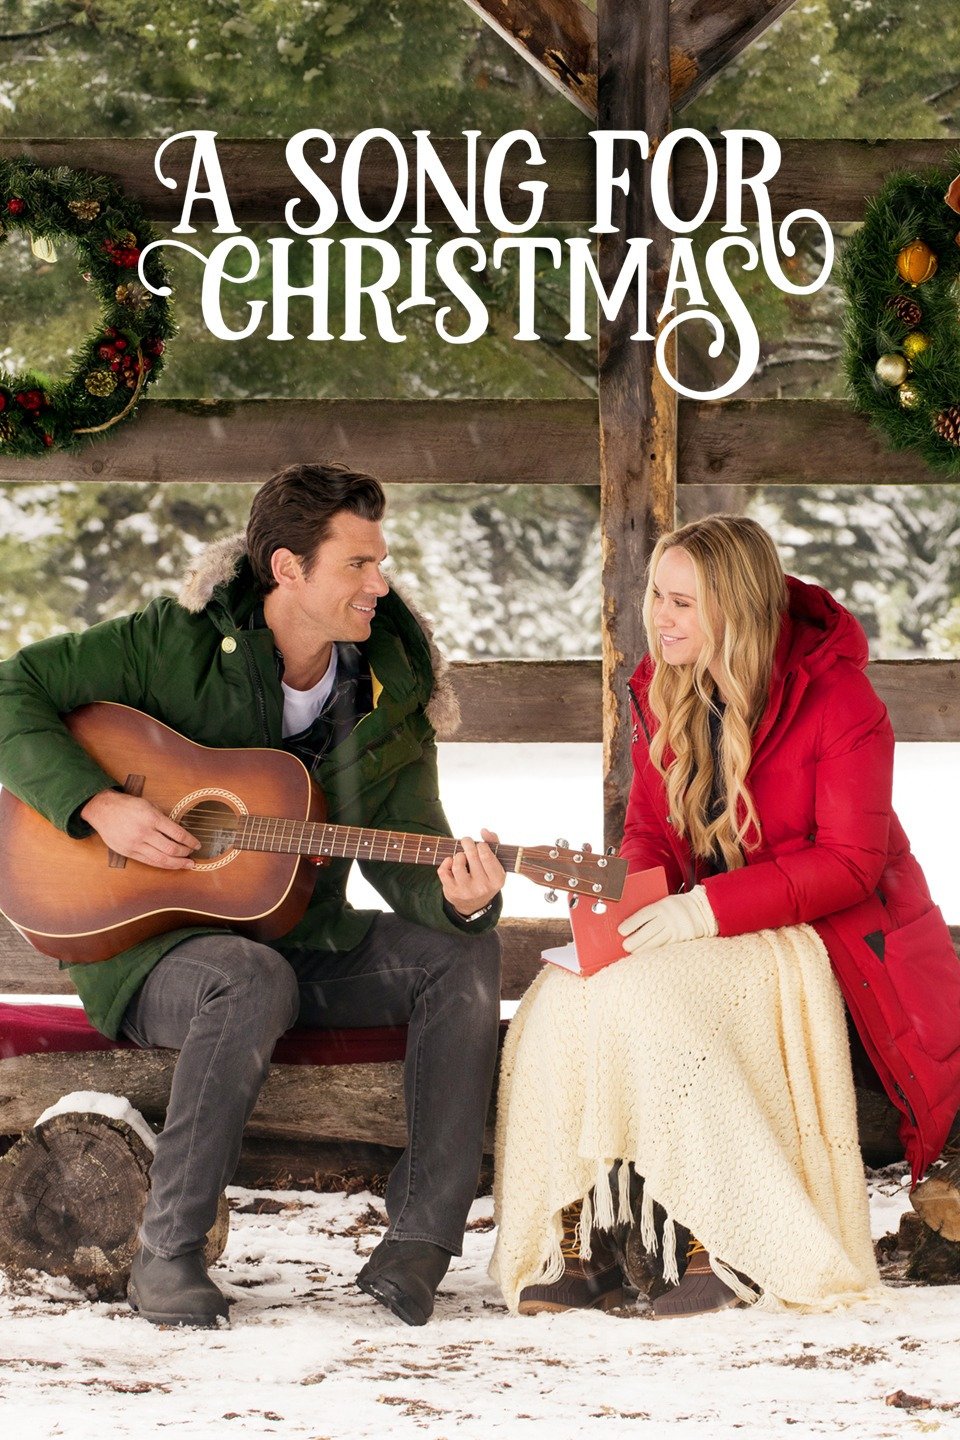 A Song for Christmas (2017) - Rotten Tomatoes